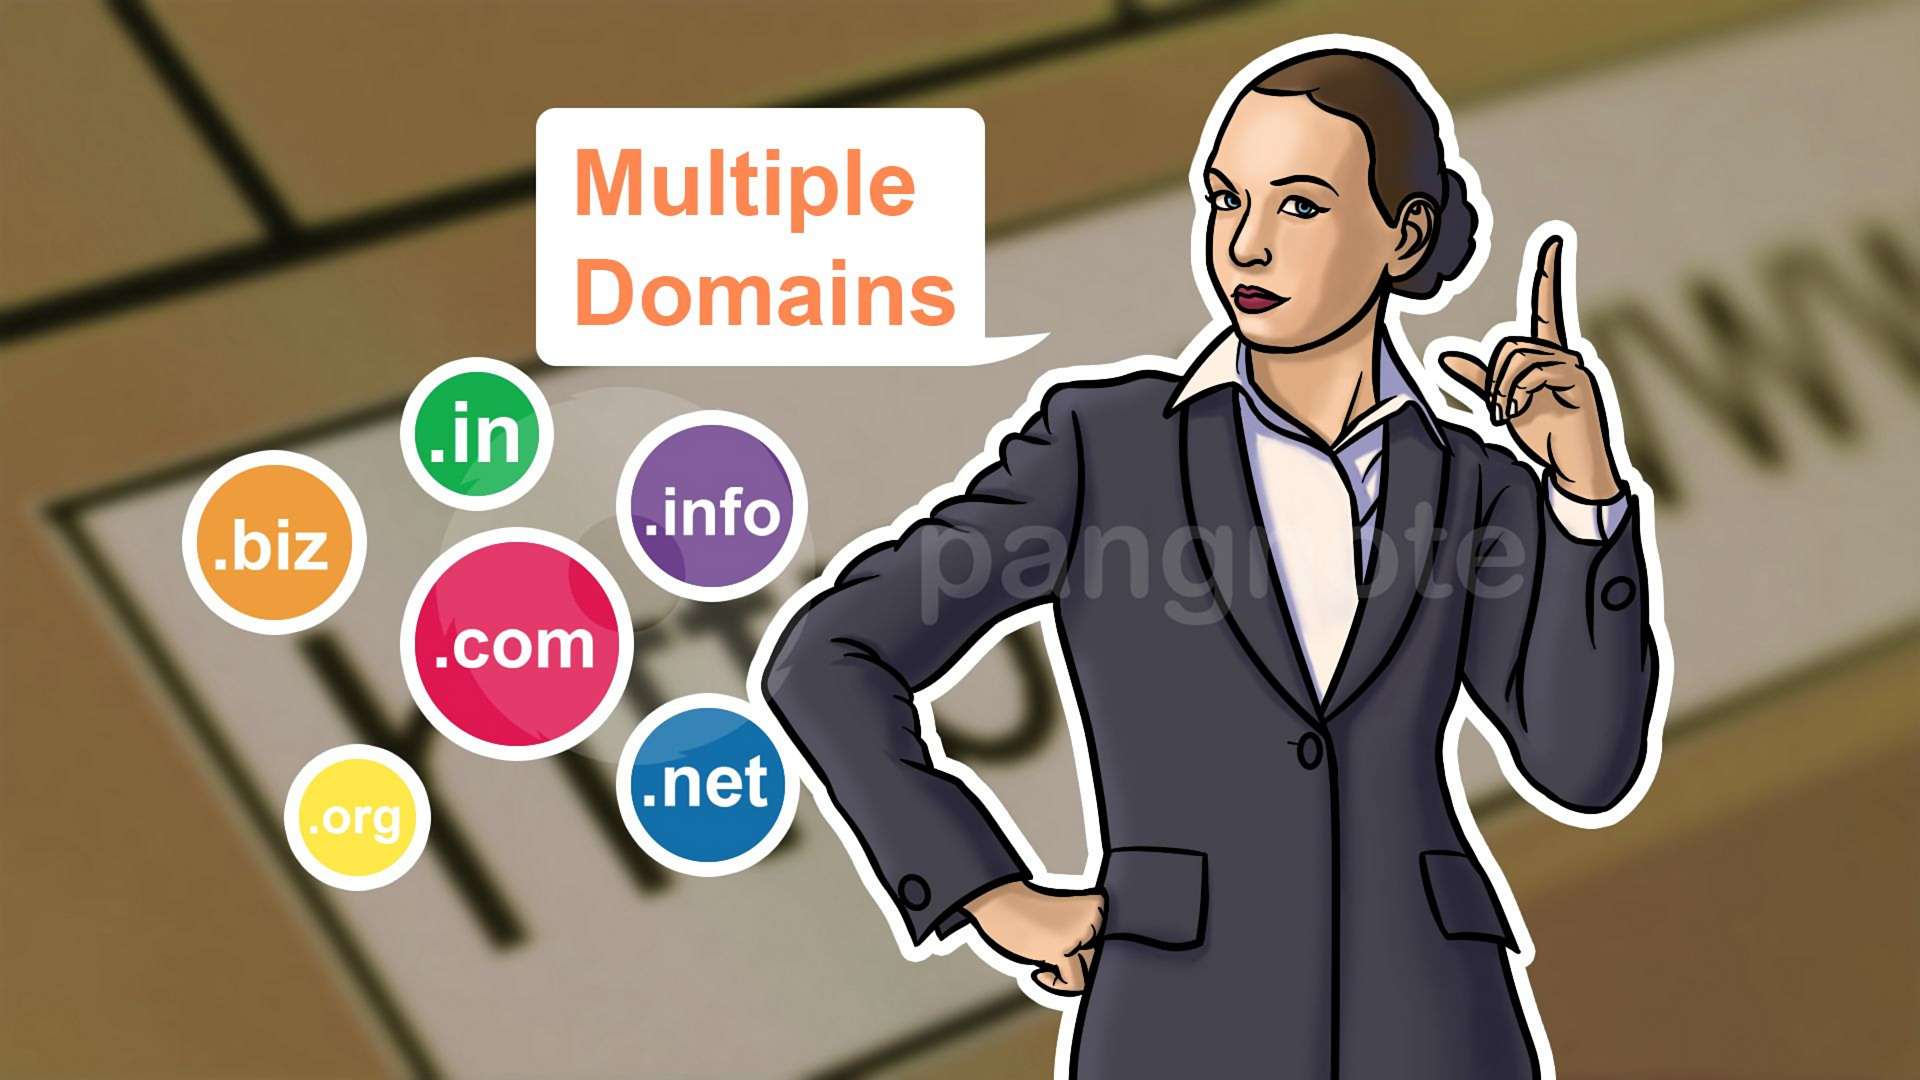 Using Multiple Domains: what you should know